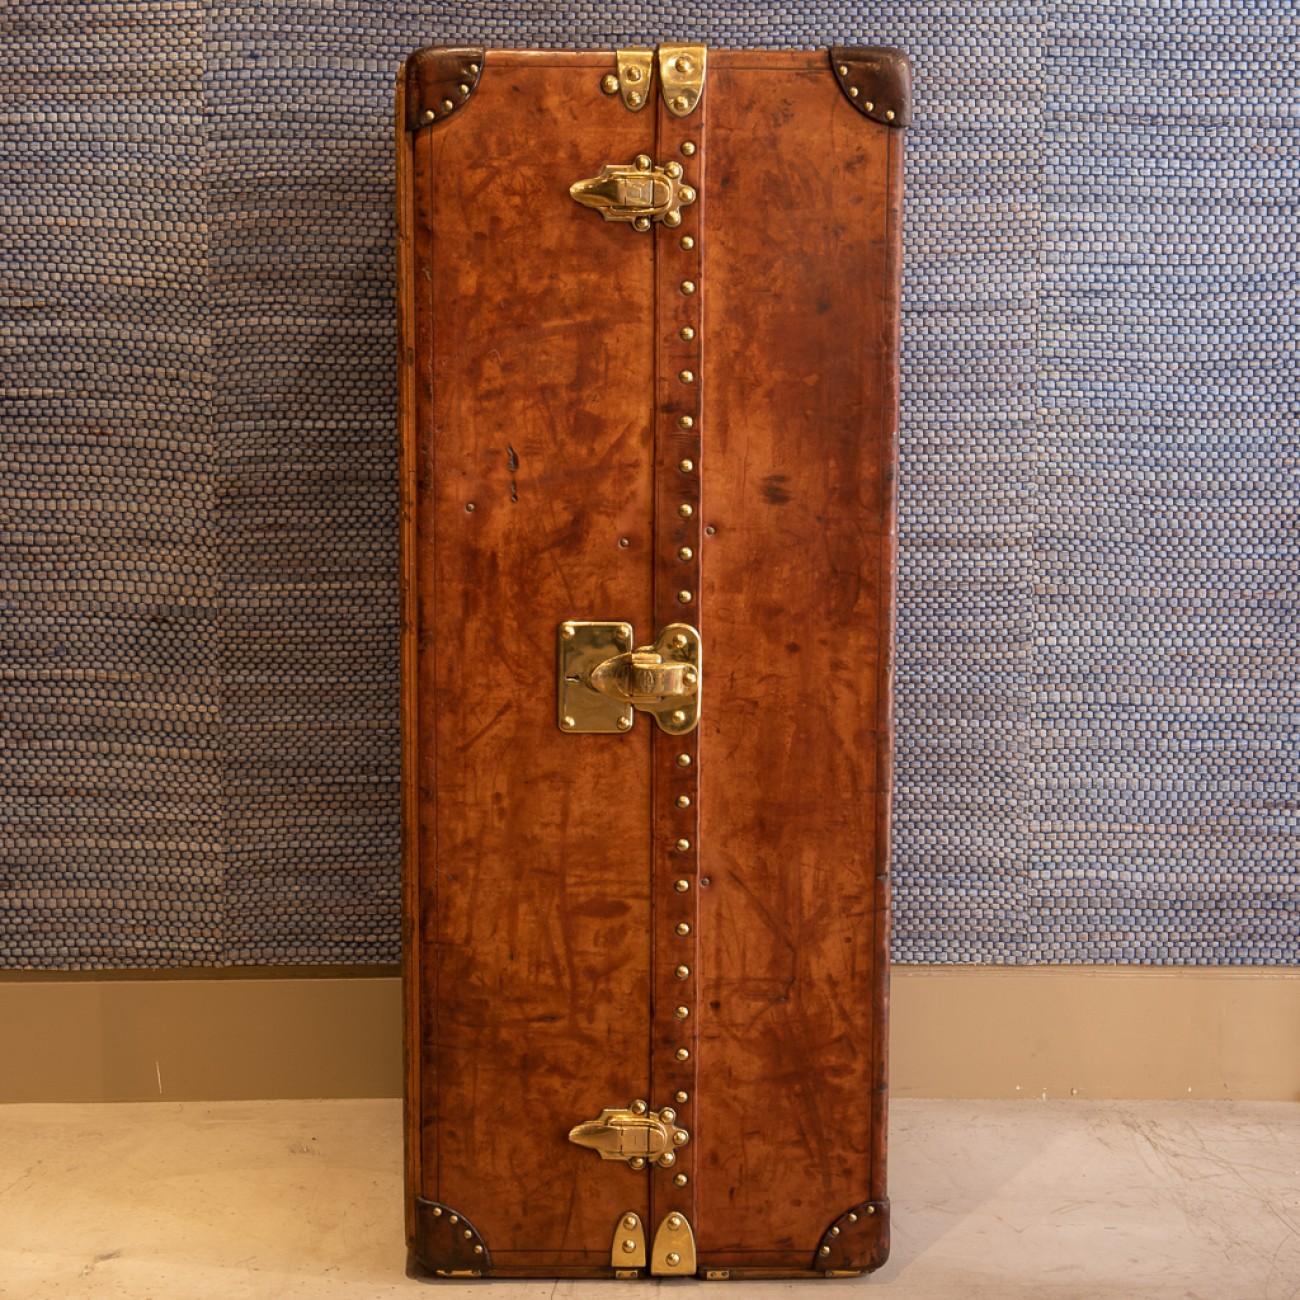 A wonderful leather covered Louis Vuitton wardrobe trunk with 50/50 internal layout of drawers with hat box and shoe compartment on one side and hanging space on the other, circa 1915.

Louis Vuitton was founded by its namesake in 1854, with the